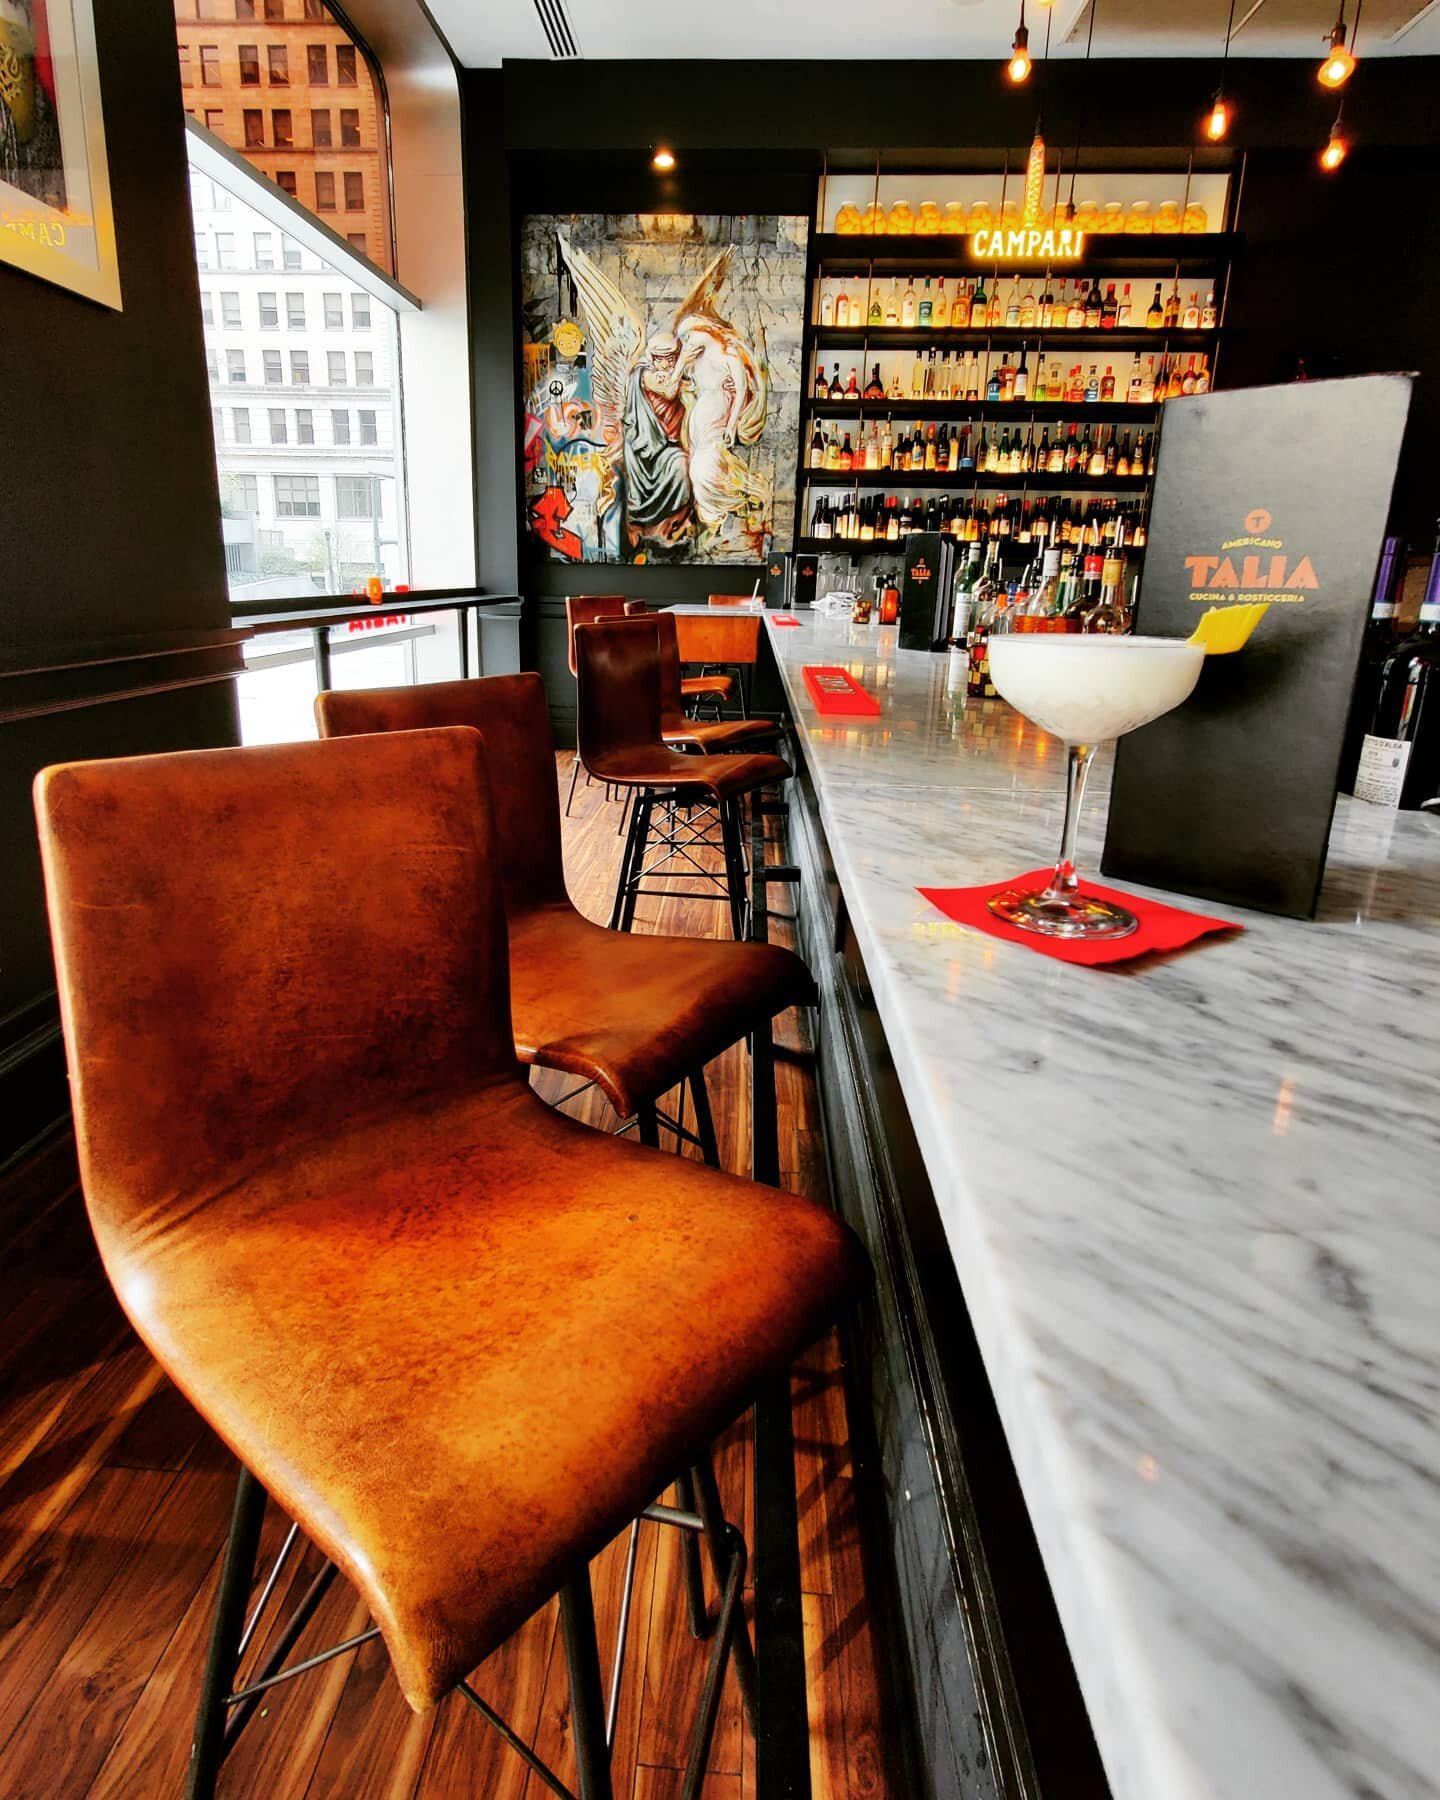 Well meet you at the bar! 🍻
Seating is limited but available! We can even accommodate groups over 4. Call ahead to guarantee yourself a spot!
(412) 456-8214
.
.
.
#bar #barlife #winebar #amarobar #cocktails #downtownpitt #downtownpittsburgh #imbibe 